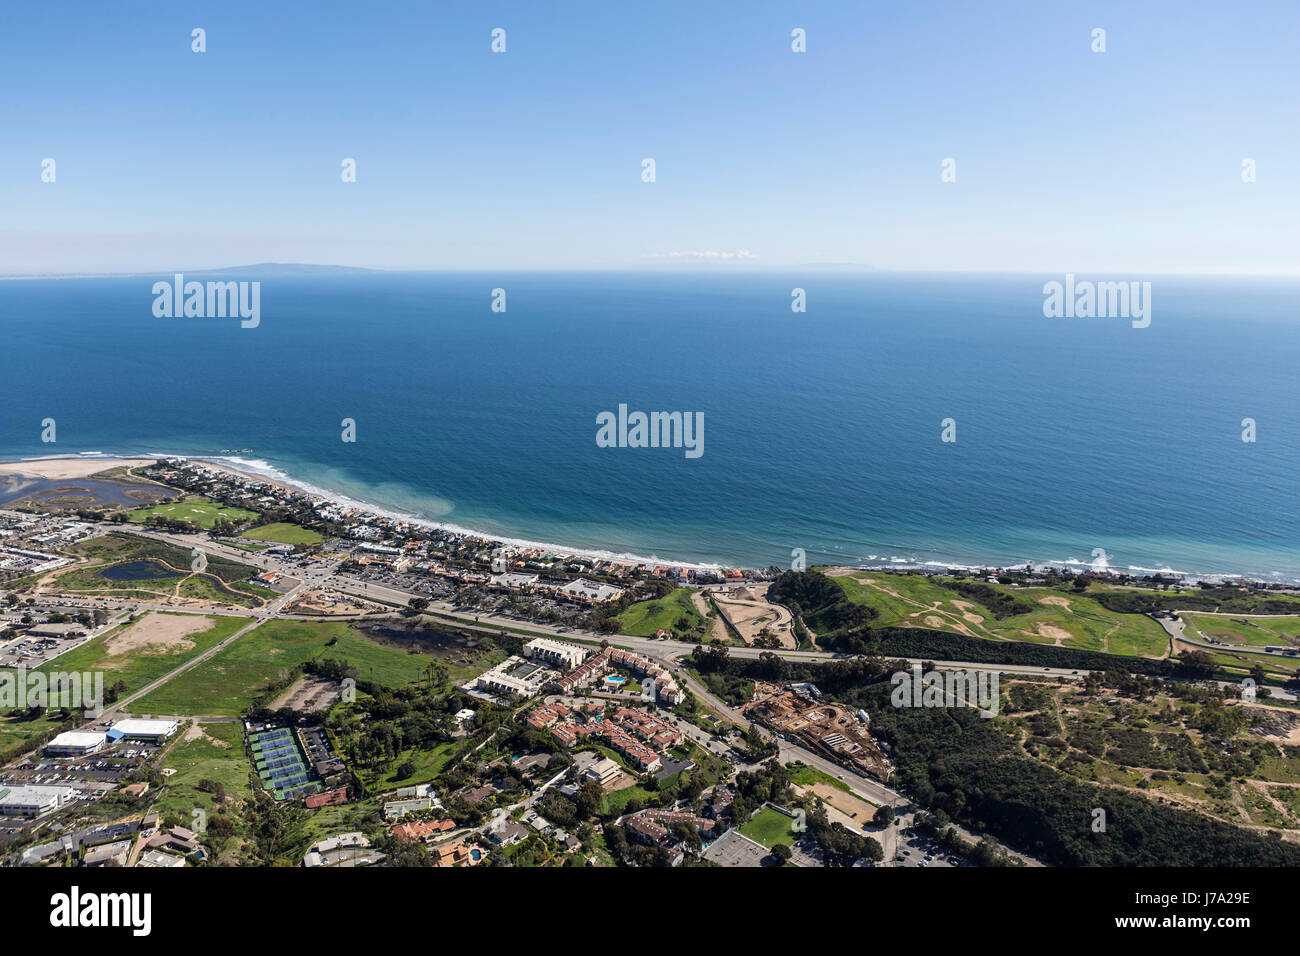 Aerial view of the Pacific Ocean and Malibu California. Stock Photo